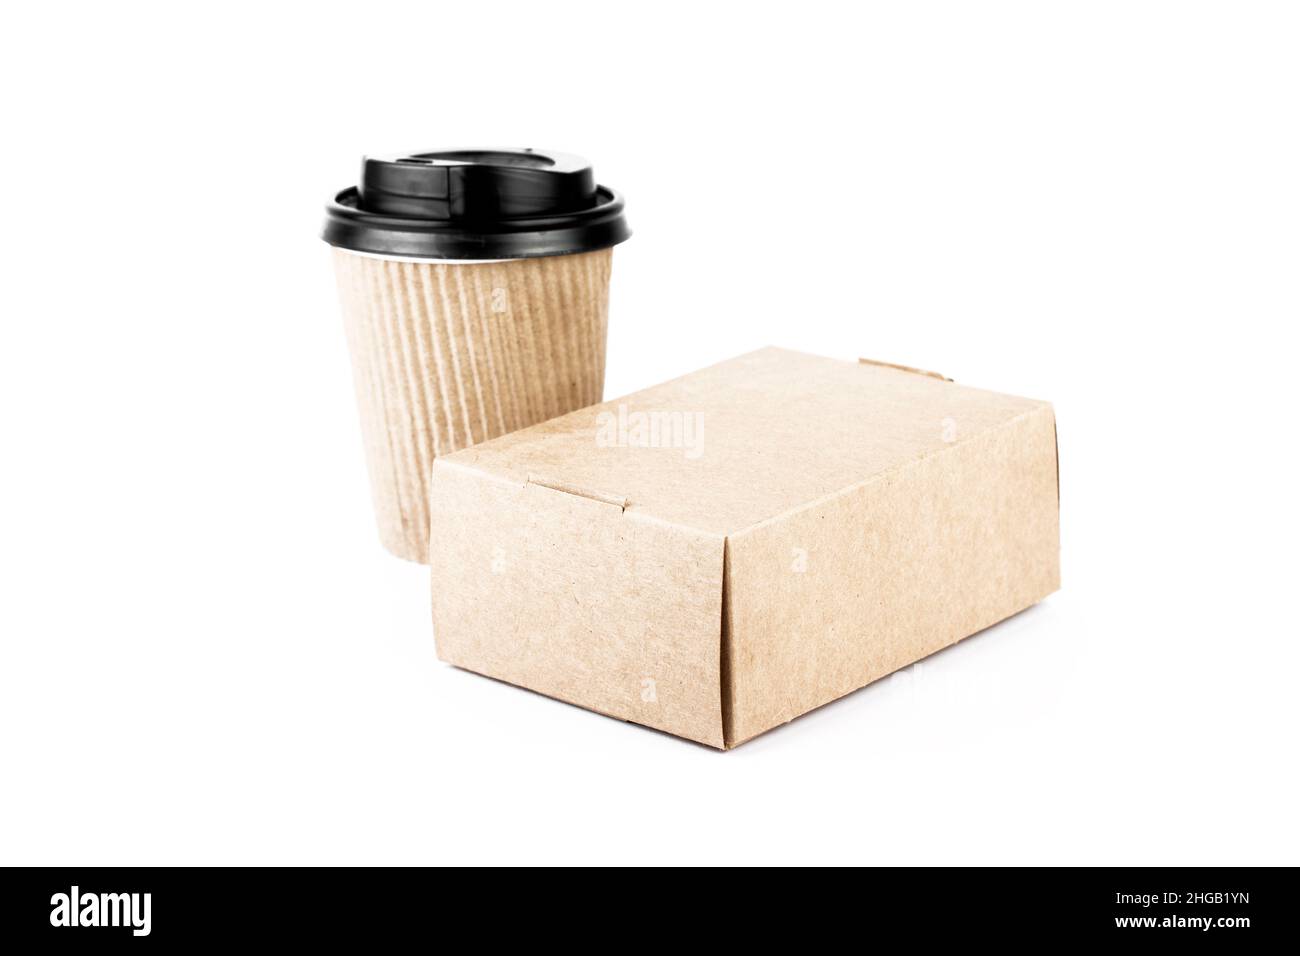 Kraft paper coffee cup and meal box isolated on white background. Take away delivery concept. Part of set. Stock Photo